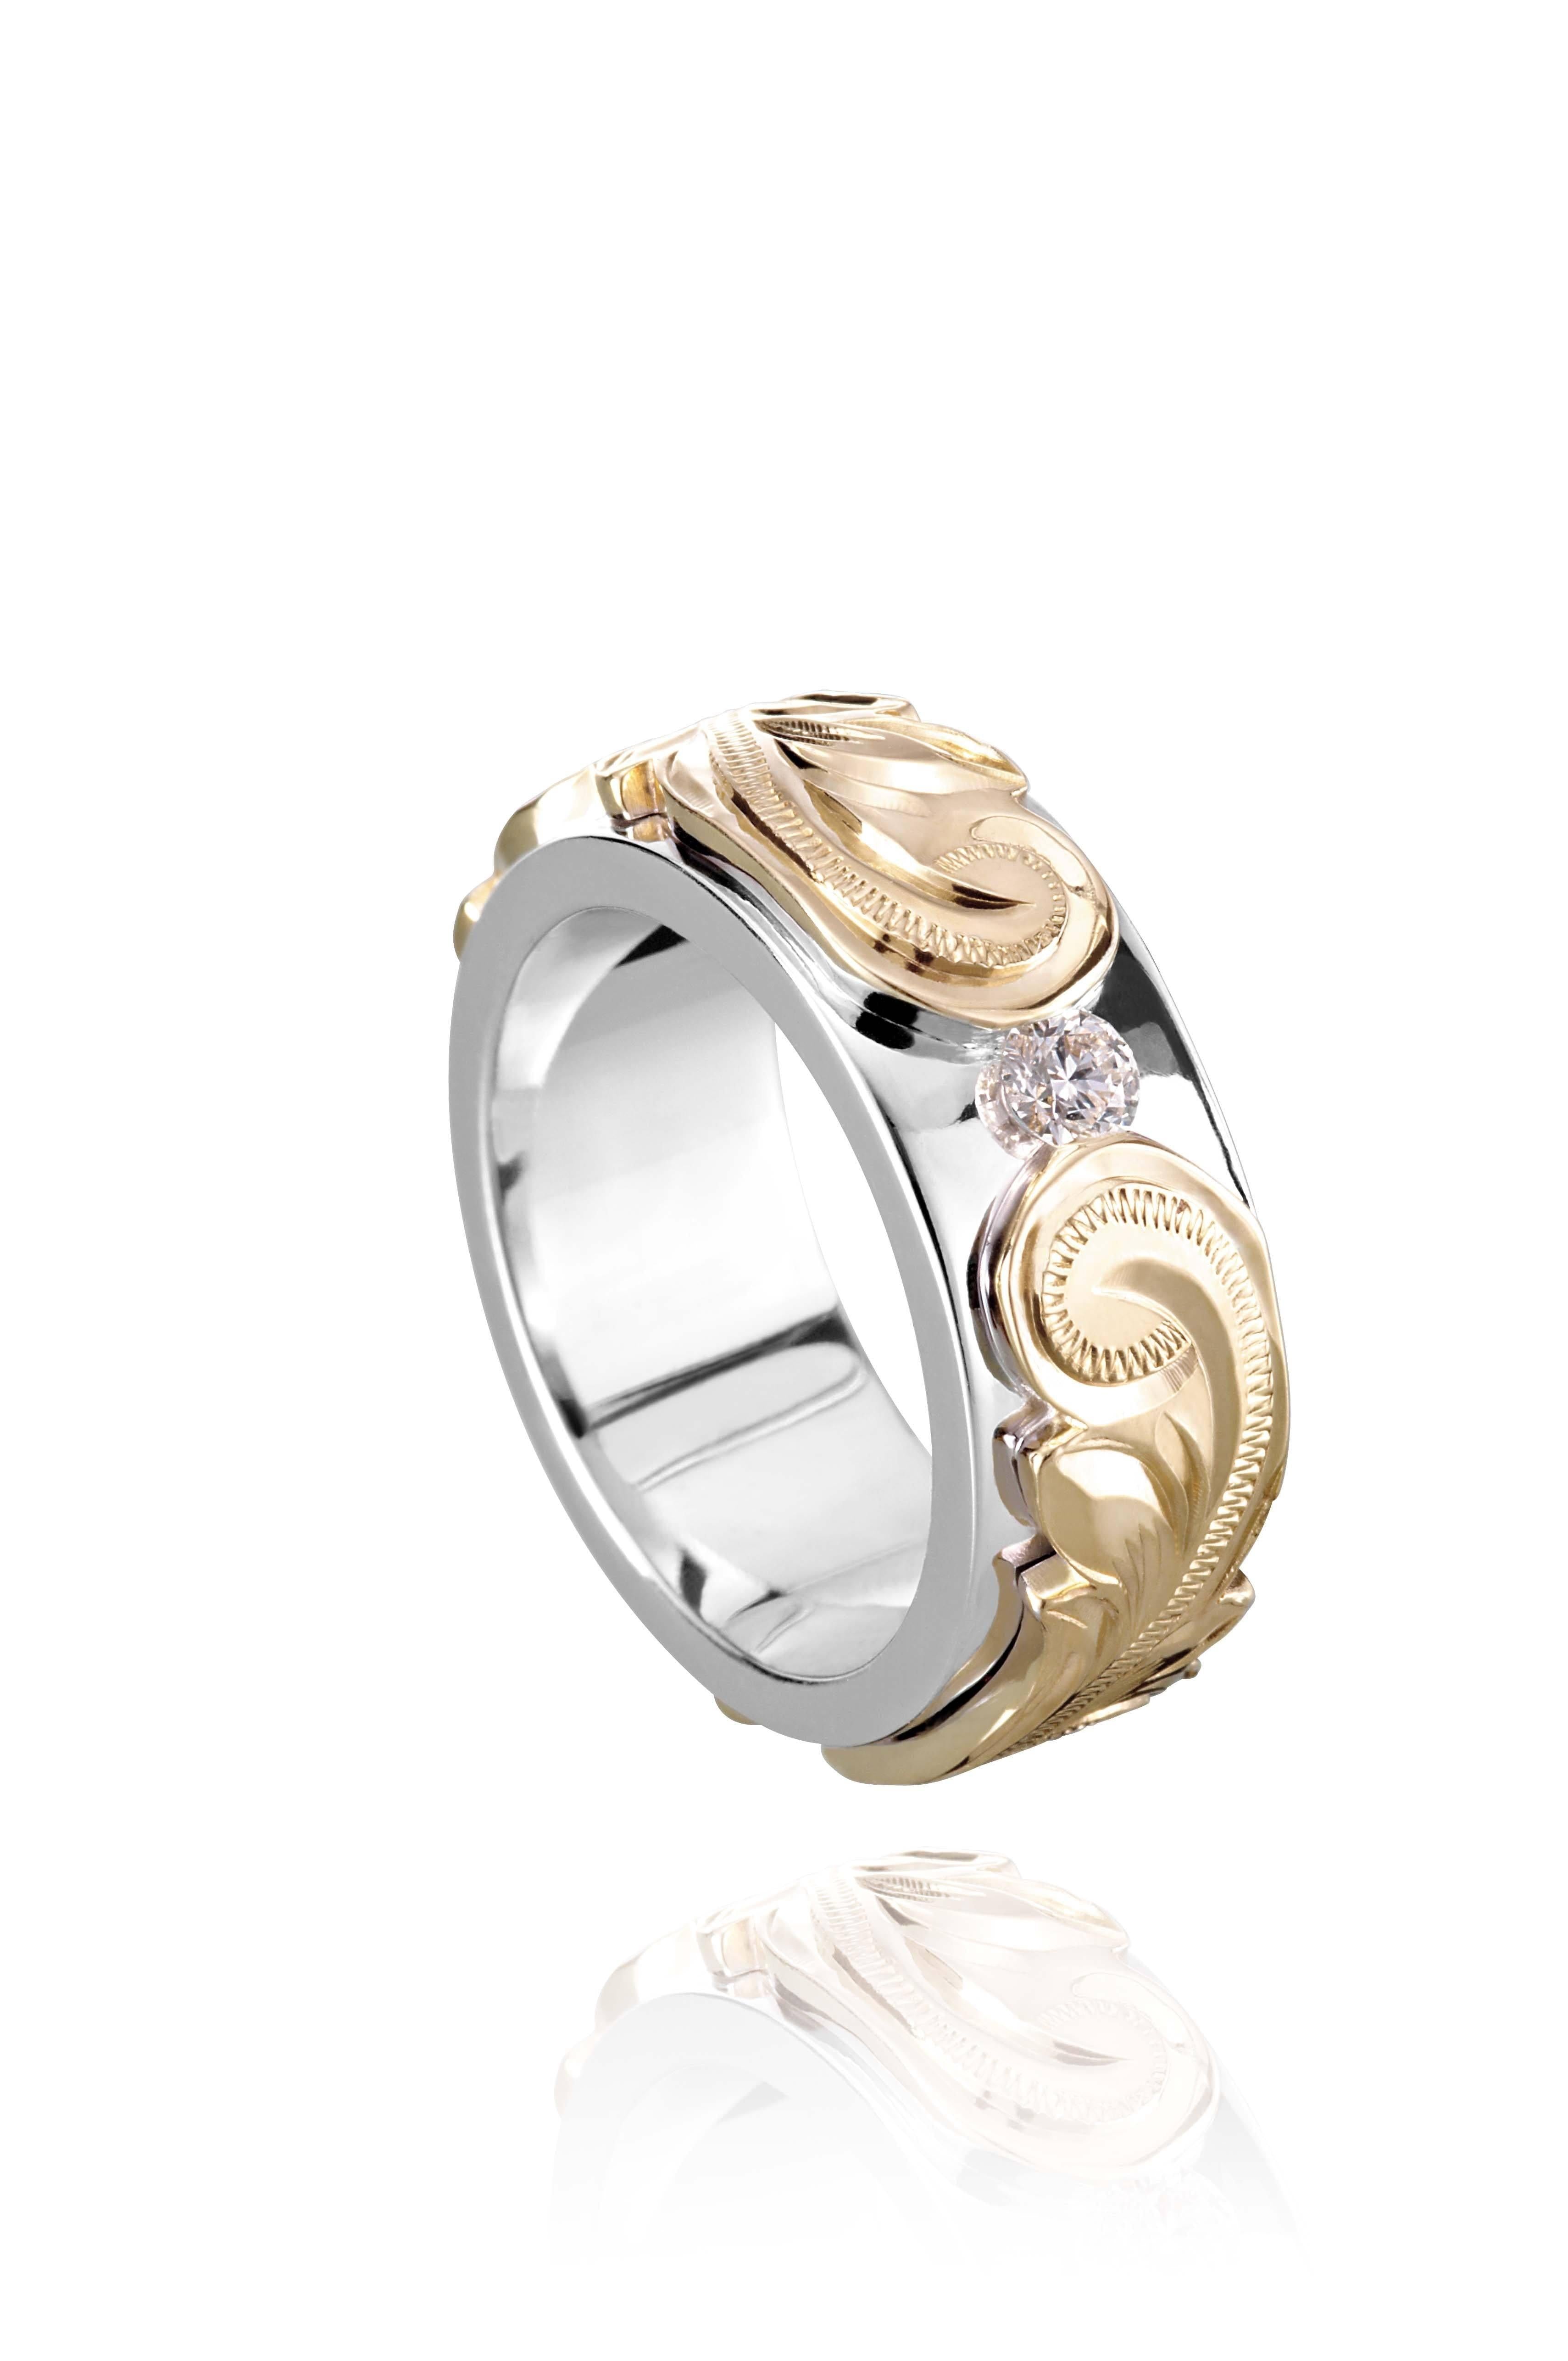 The picture shows a 14K white and yellow gold two-tone pinched 8 mm ring with hand-engravings and a diamond.